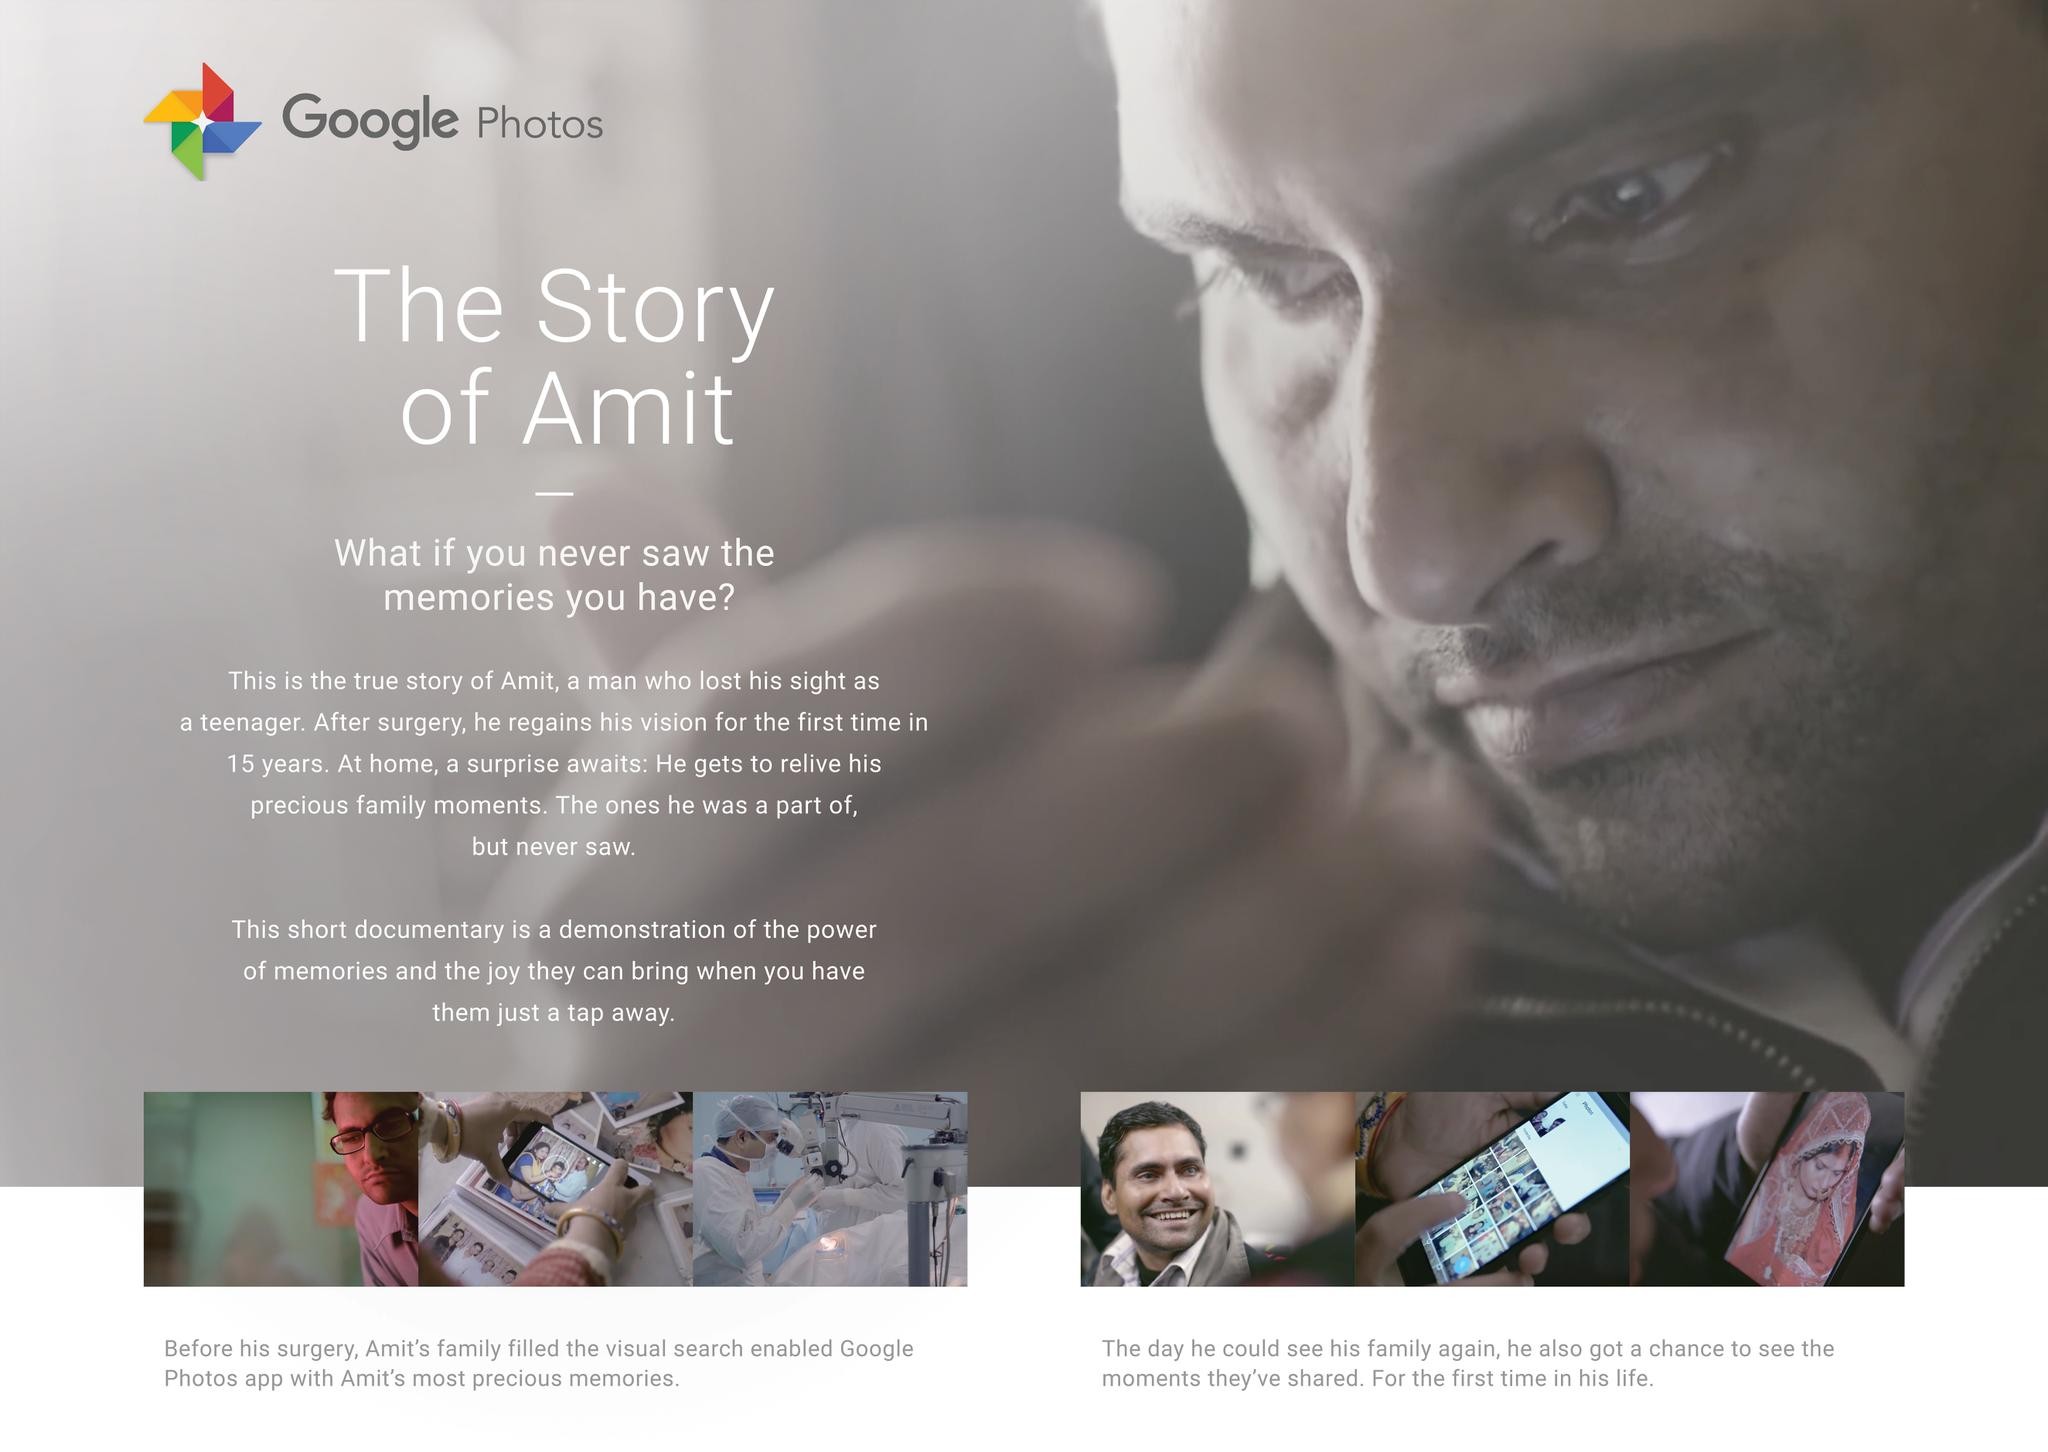 The Story of Amit